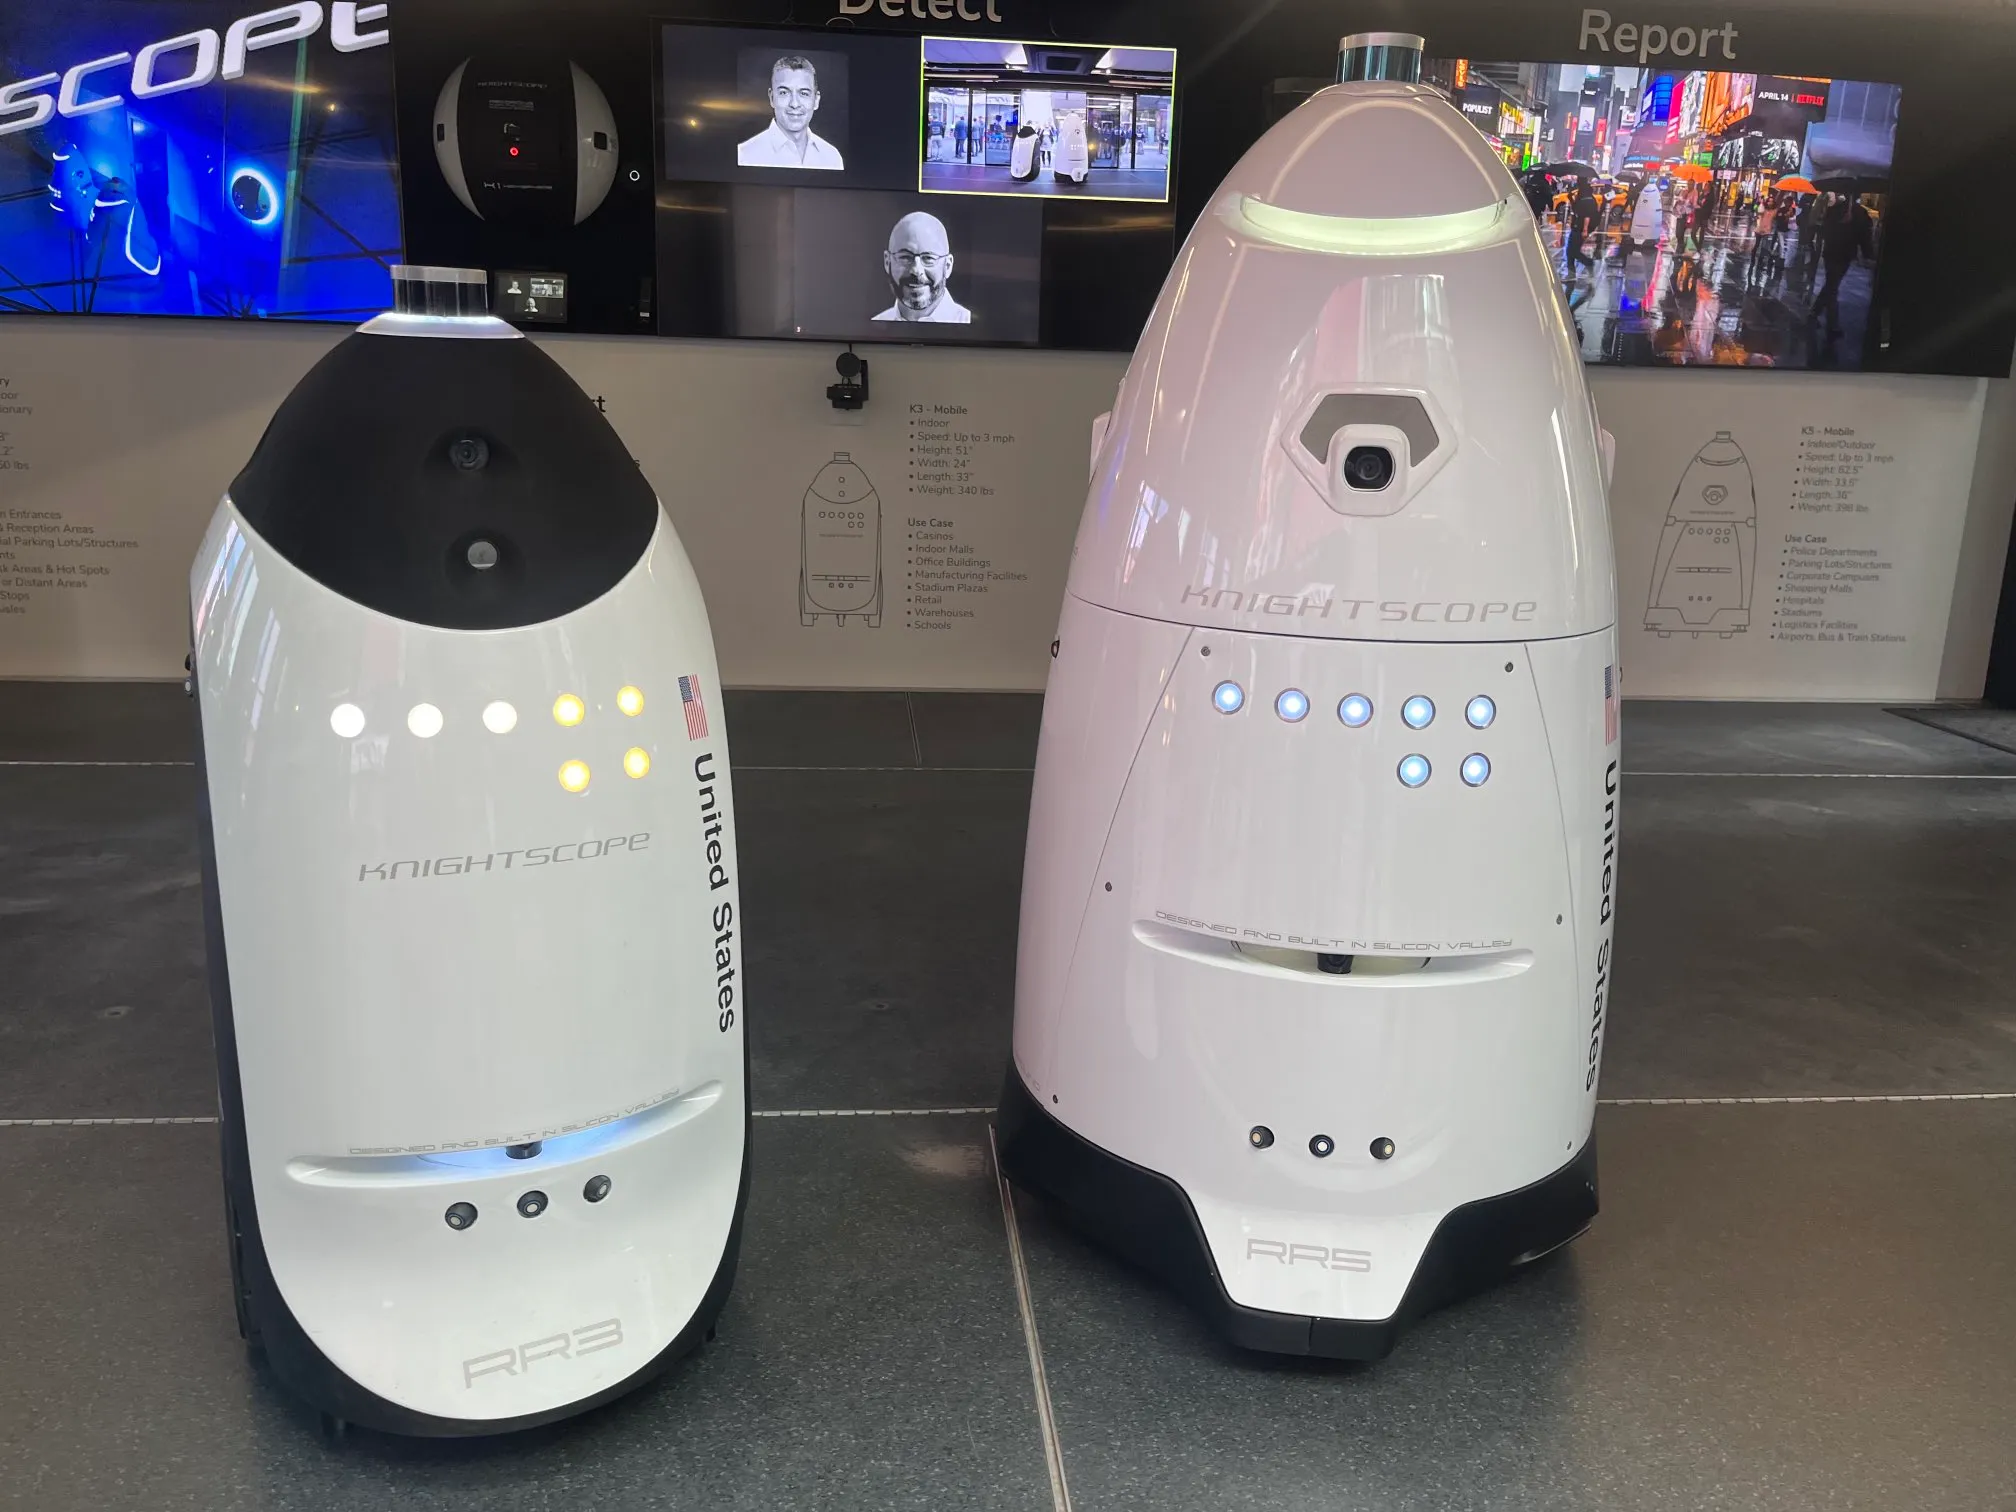 NYC Says Goodbye to Robo-Cop: Inside the Short-Lived Saga of Times Square's Security Robot